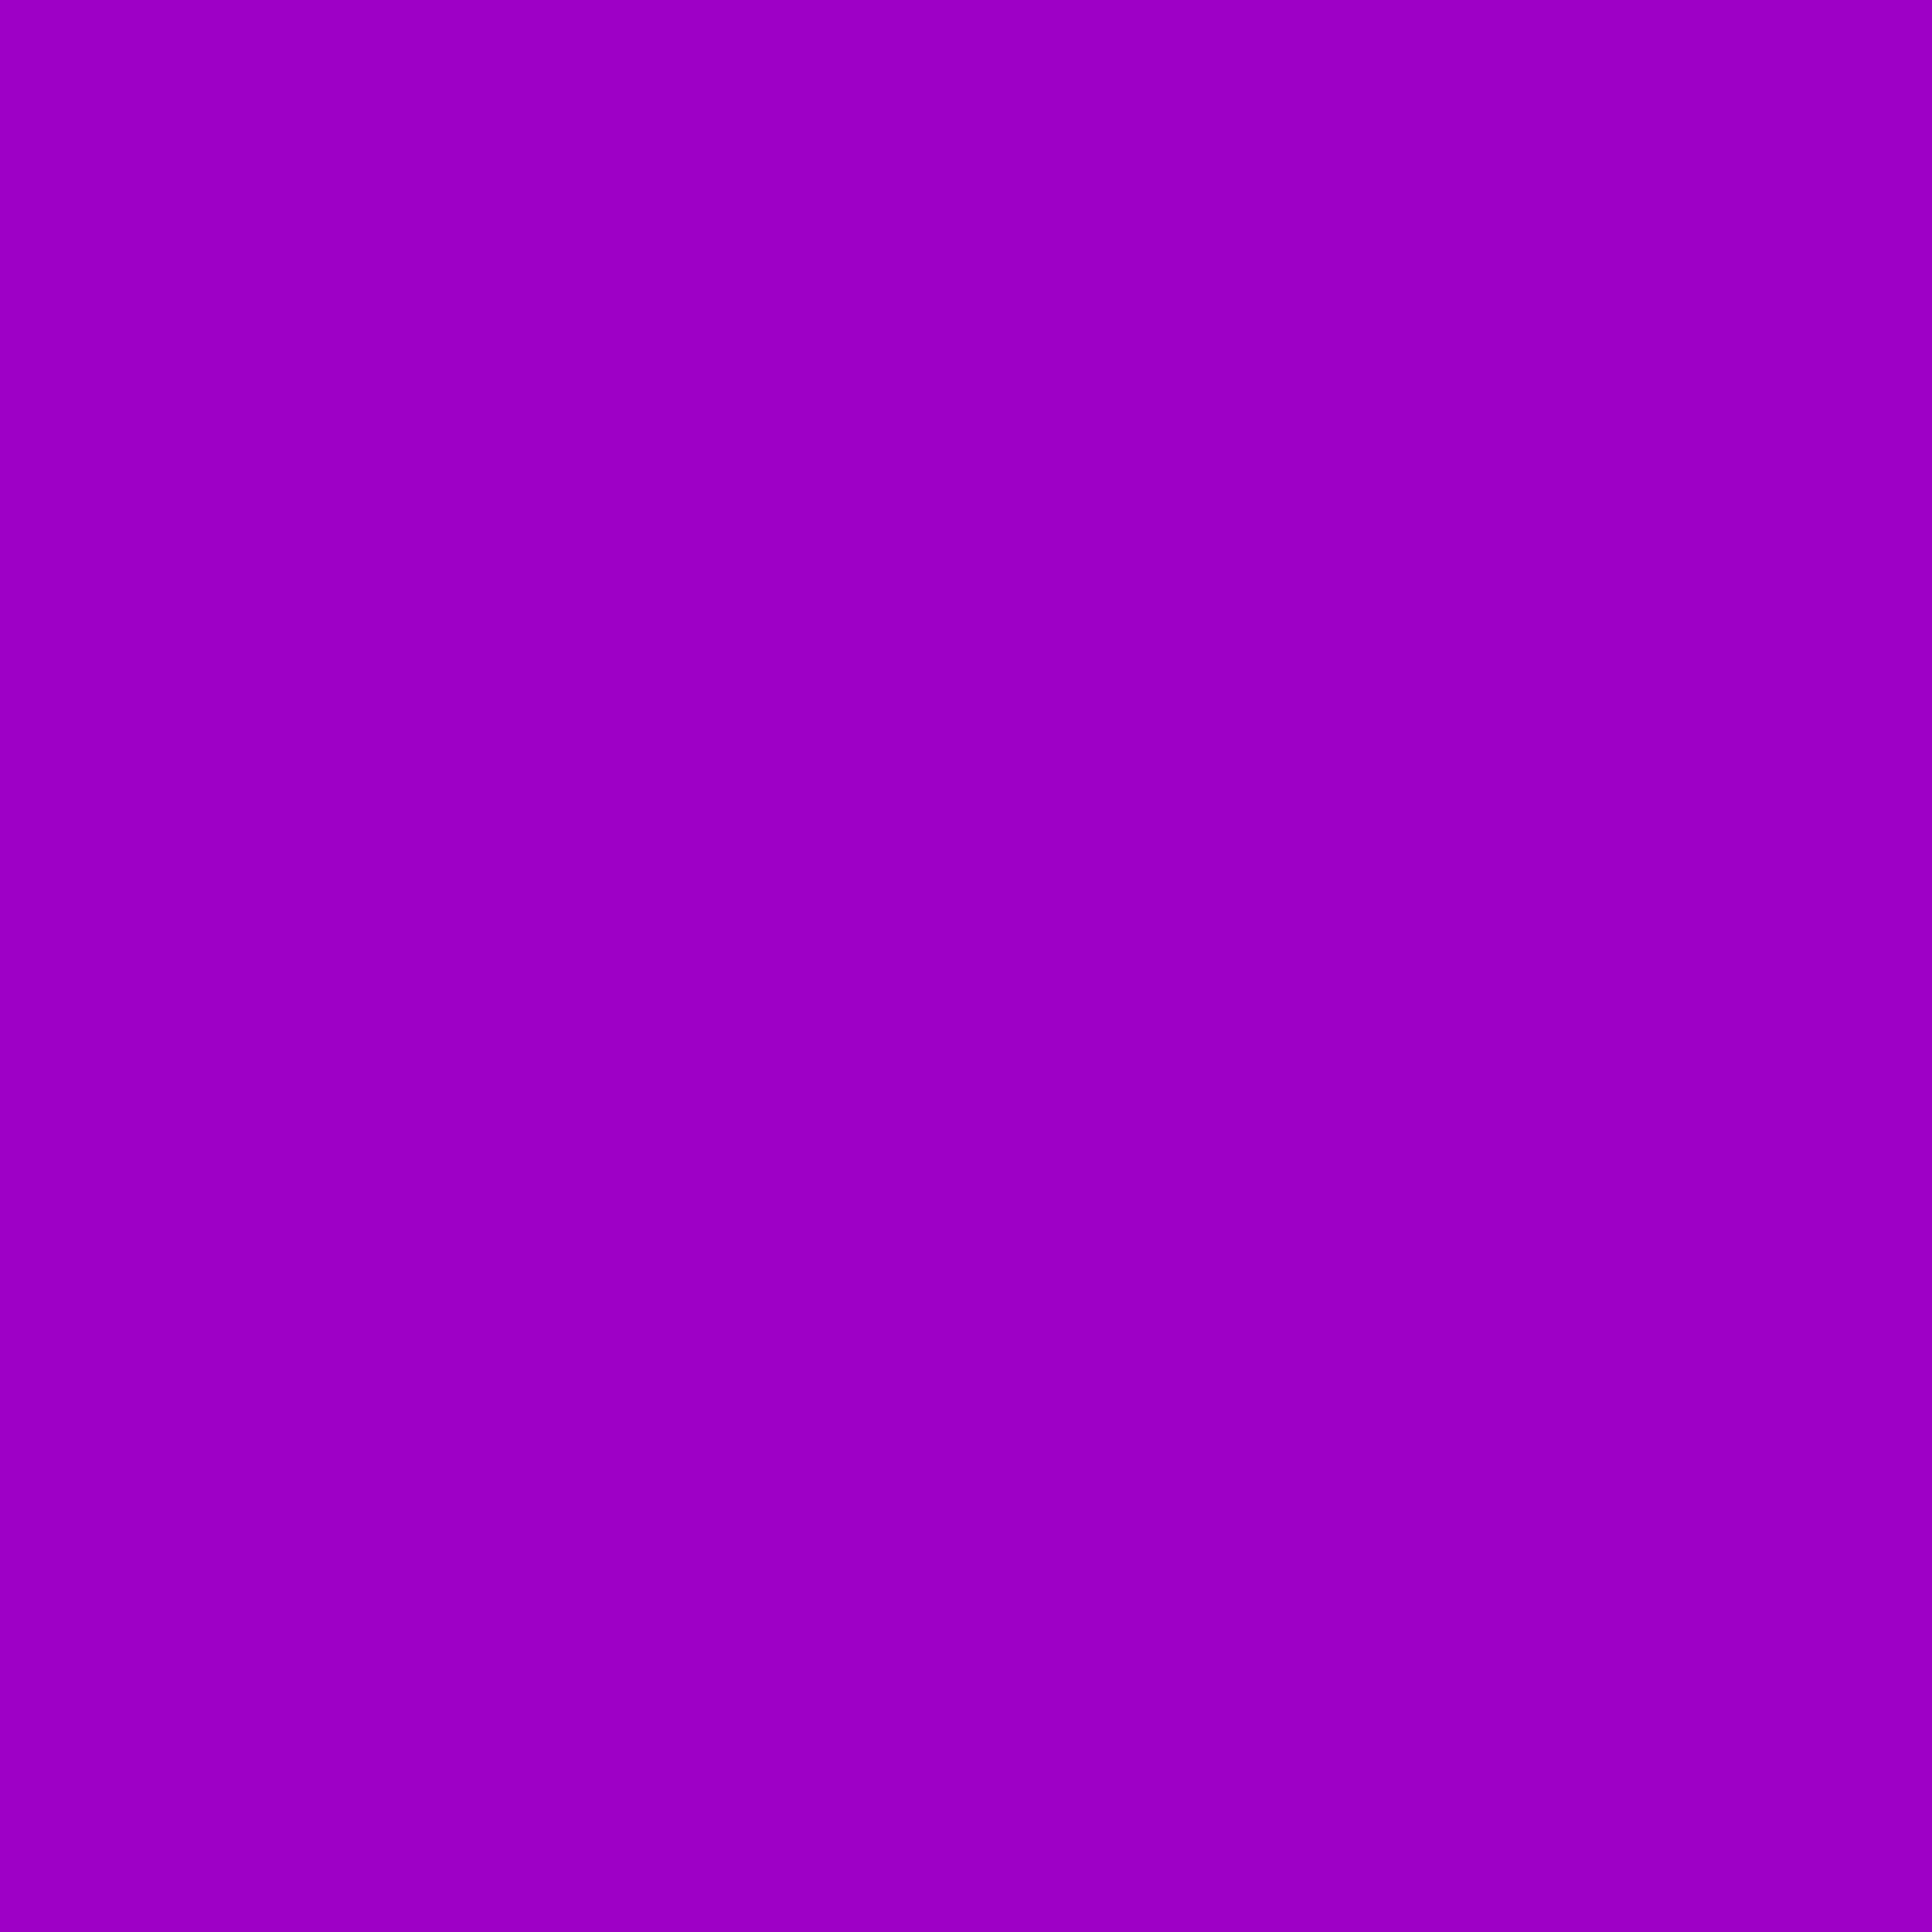 2732x2732 Purple Munsell Solid Color Background